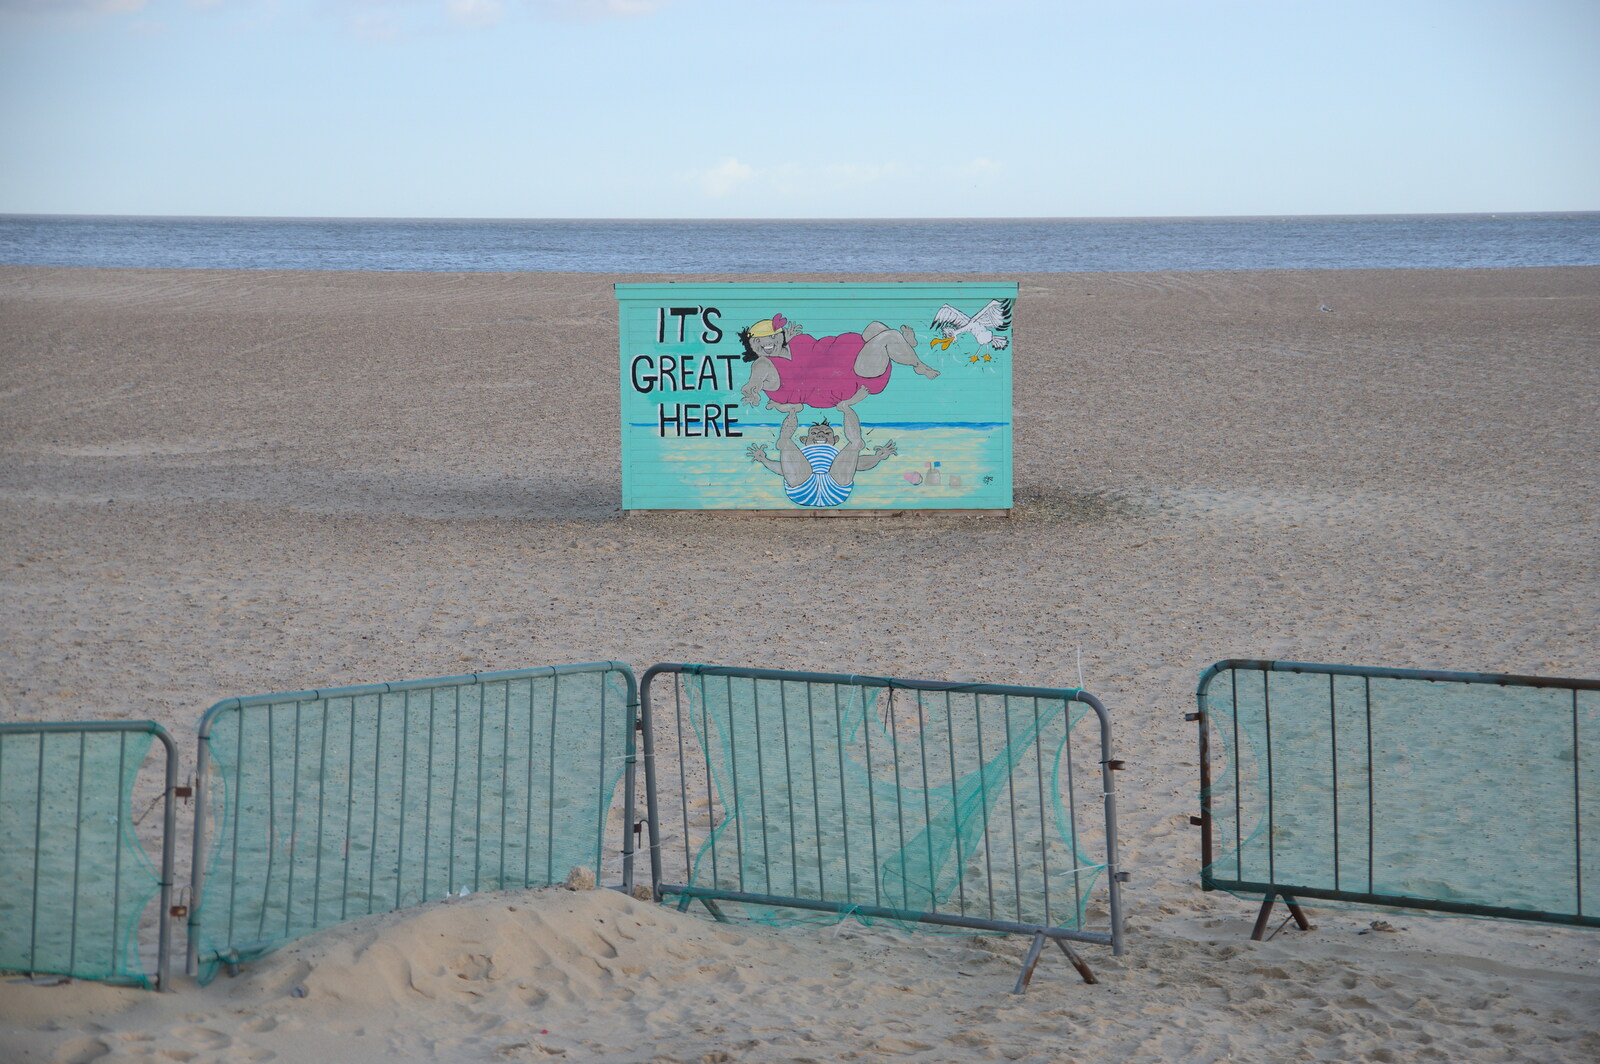 An optimistic poster on a windy beach from The Hippodrome Christmas Spectacular, Great Yarmouth, Norfolk - 29th December 2022